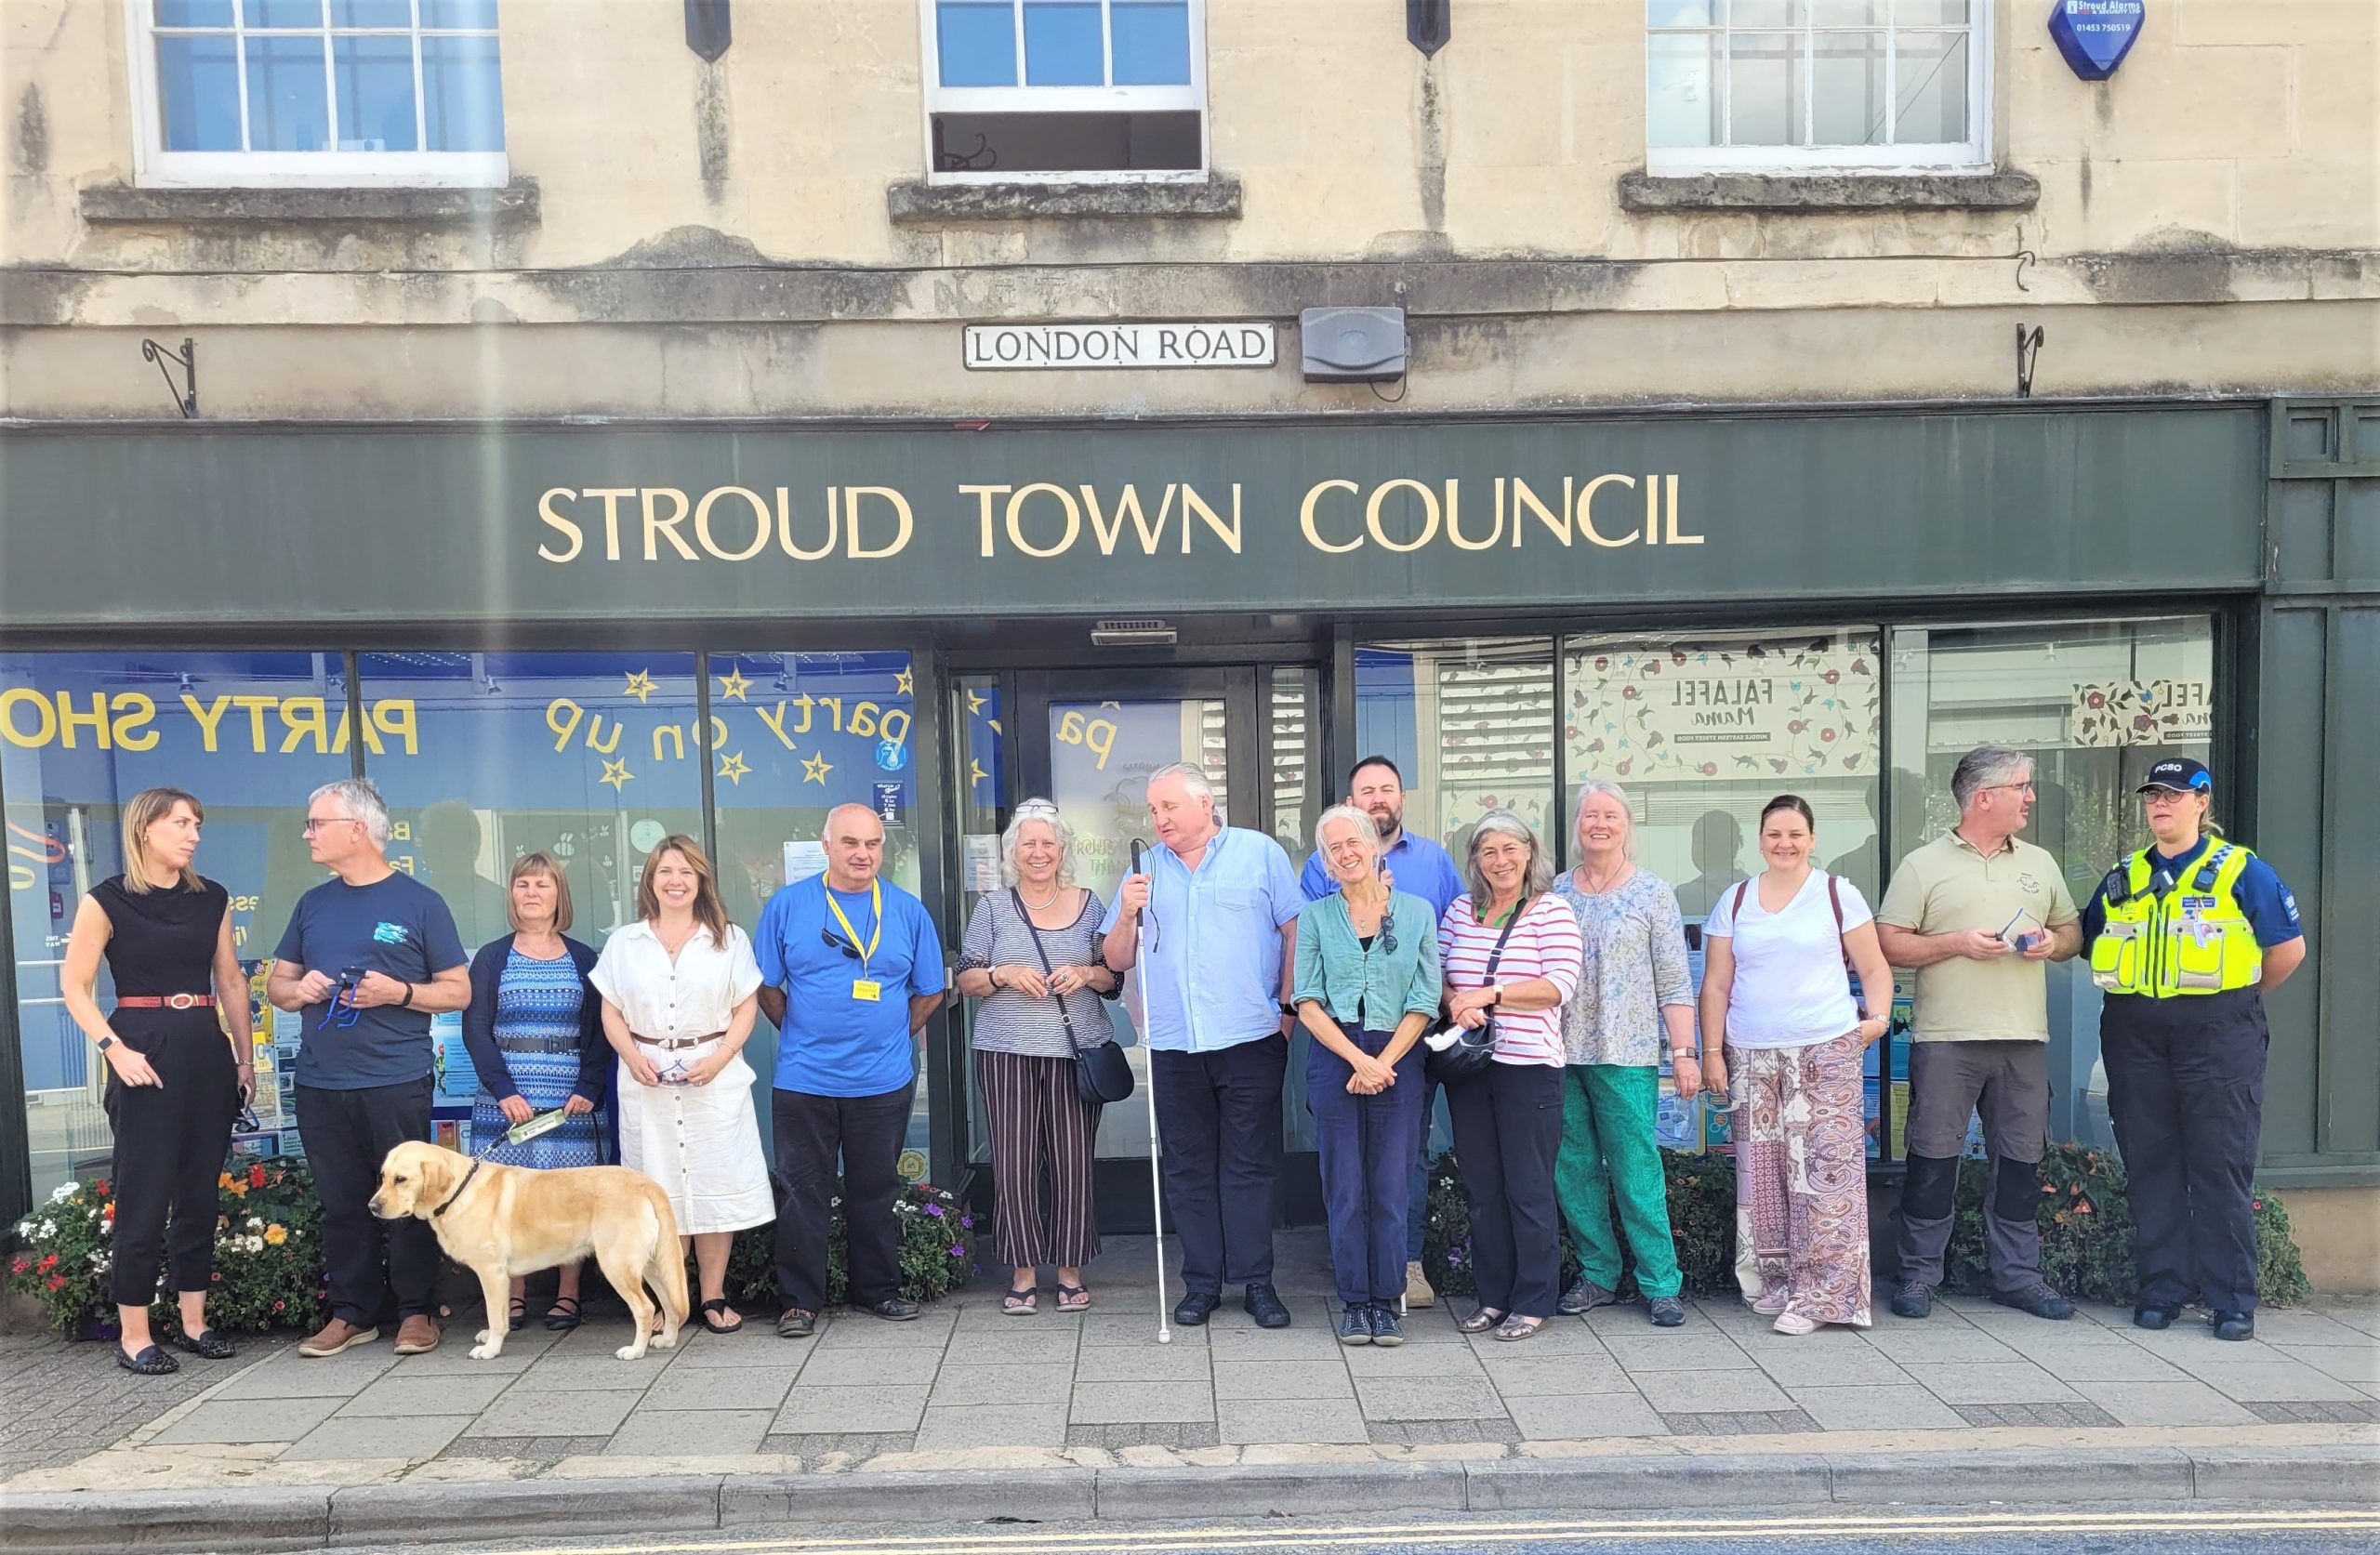 Members of Stroud District and Stroud Town Councils are stood with Gloucestershire SLC members outside Stroud Town Council. They are in a line, smiling at the camera.